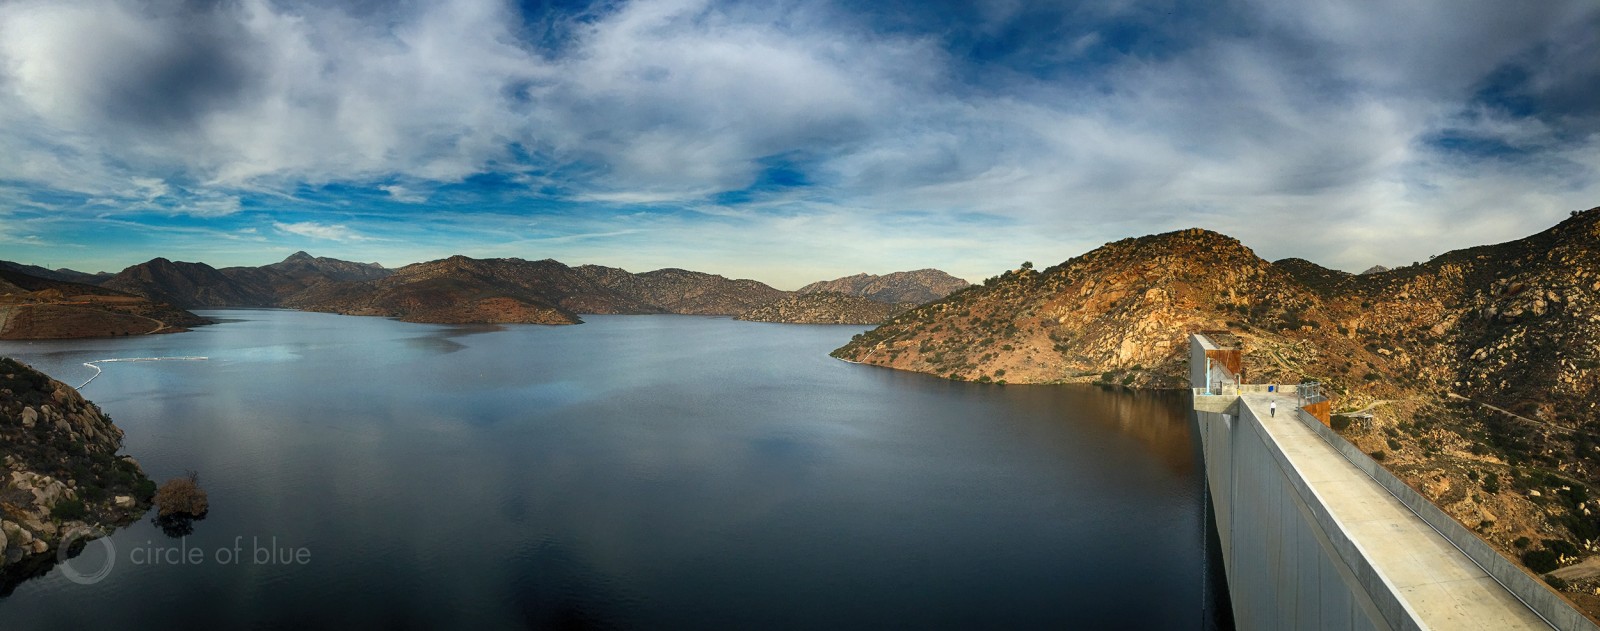 The San Vincent Dam stores water for San Diego, California. Late last year the city opened the $US 1 billion Carlsbad desalination plant, the nation’s largest, to increase freshwater supplies. Photo © J. Carl Ganter / Circle of Blue